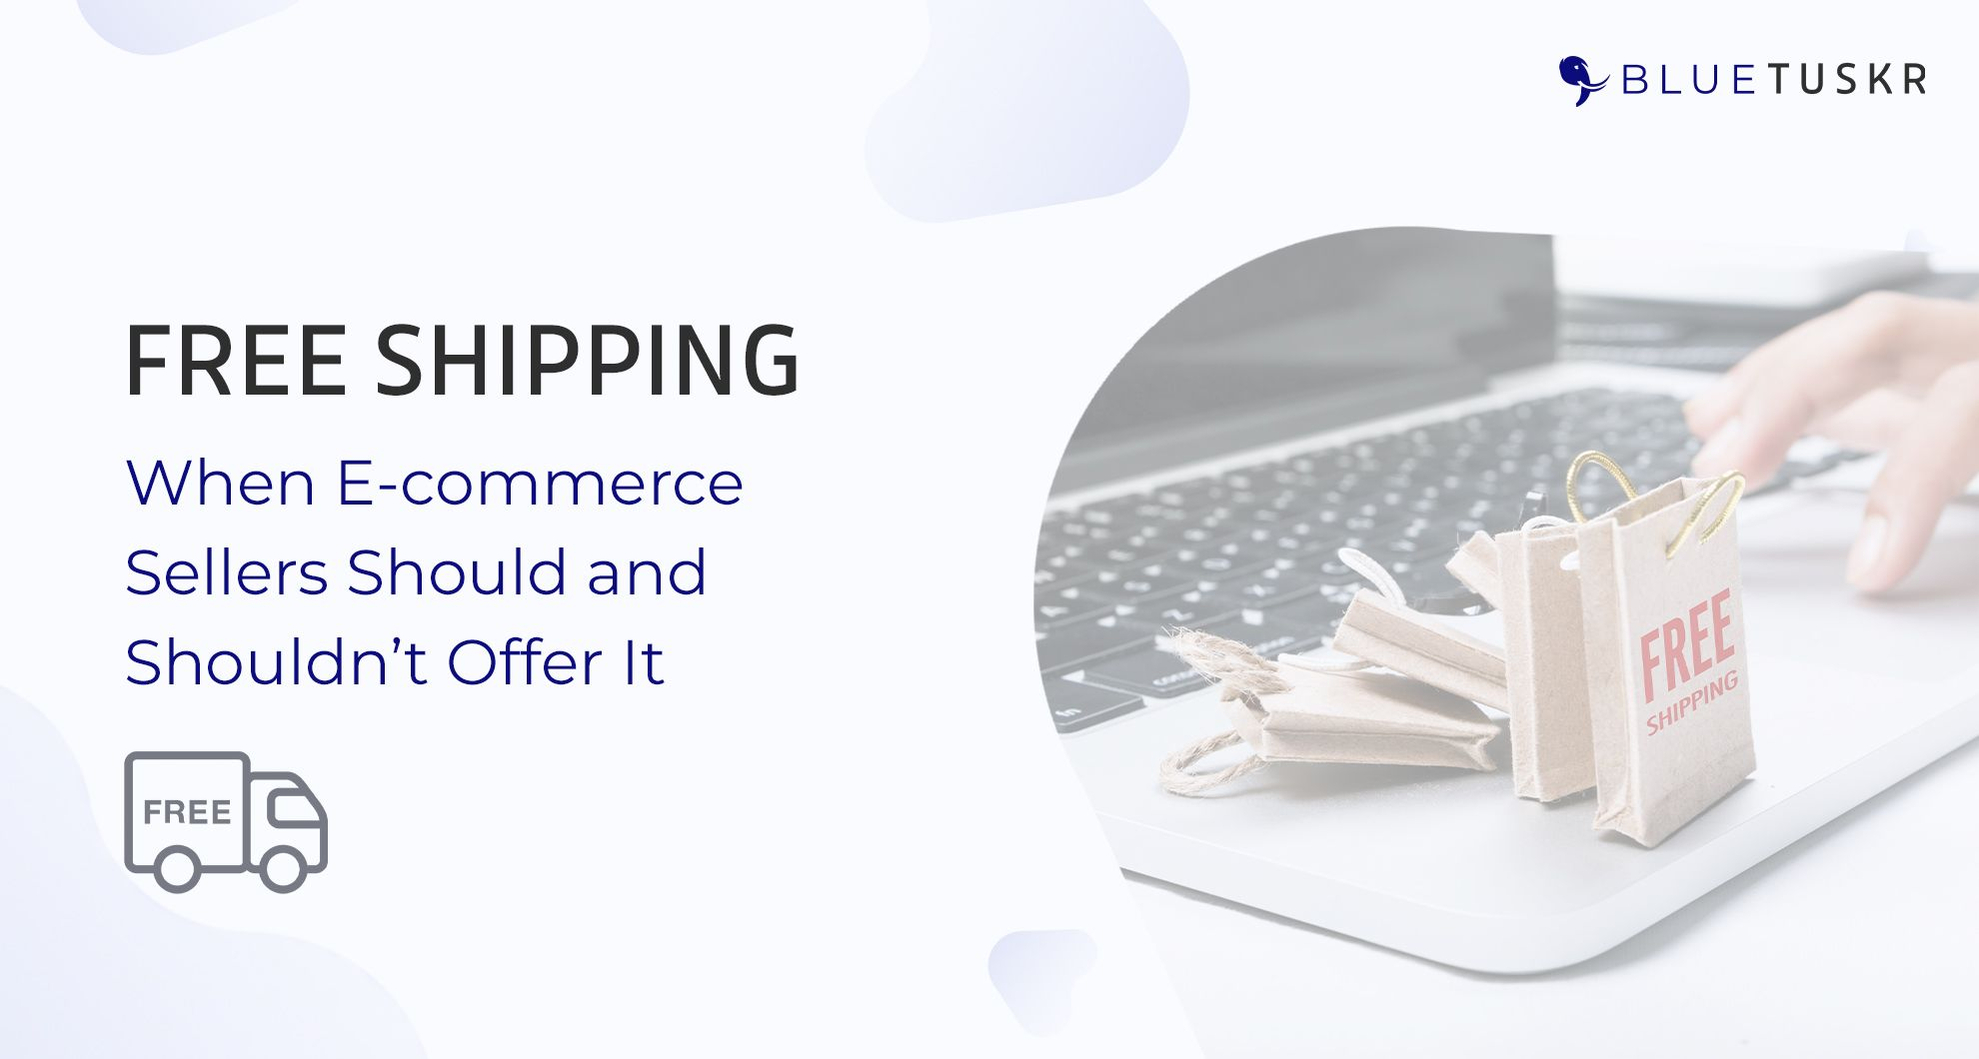 FREE SHIPPING: WHEN E-COMMERCE SELLERS SHOULD AND SHOULDN’T OFFER IT